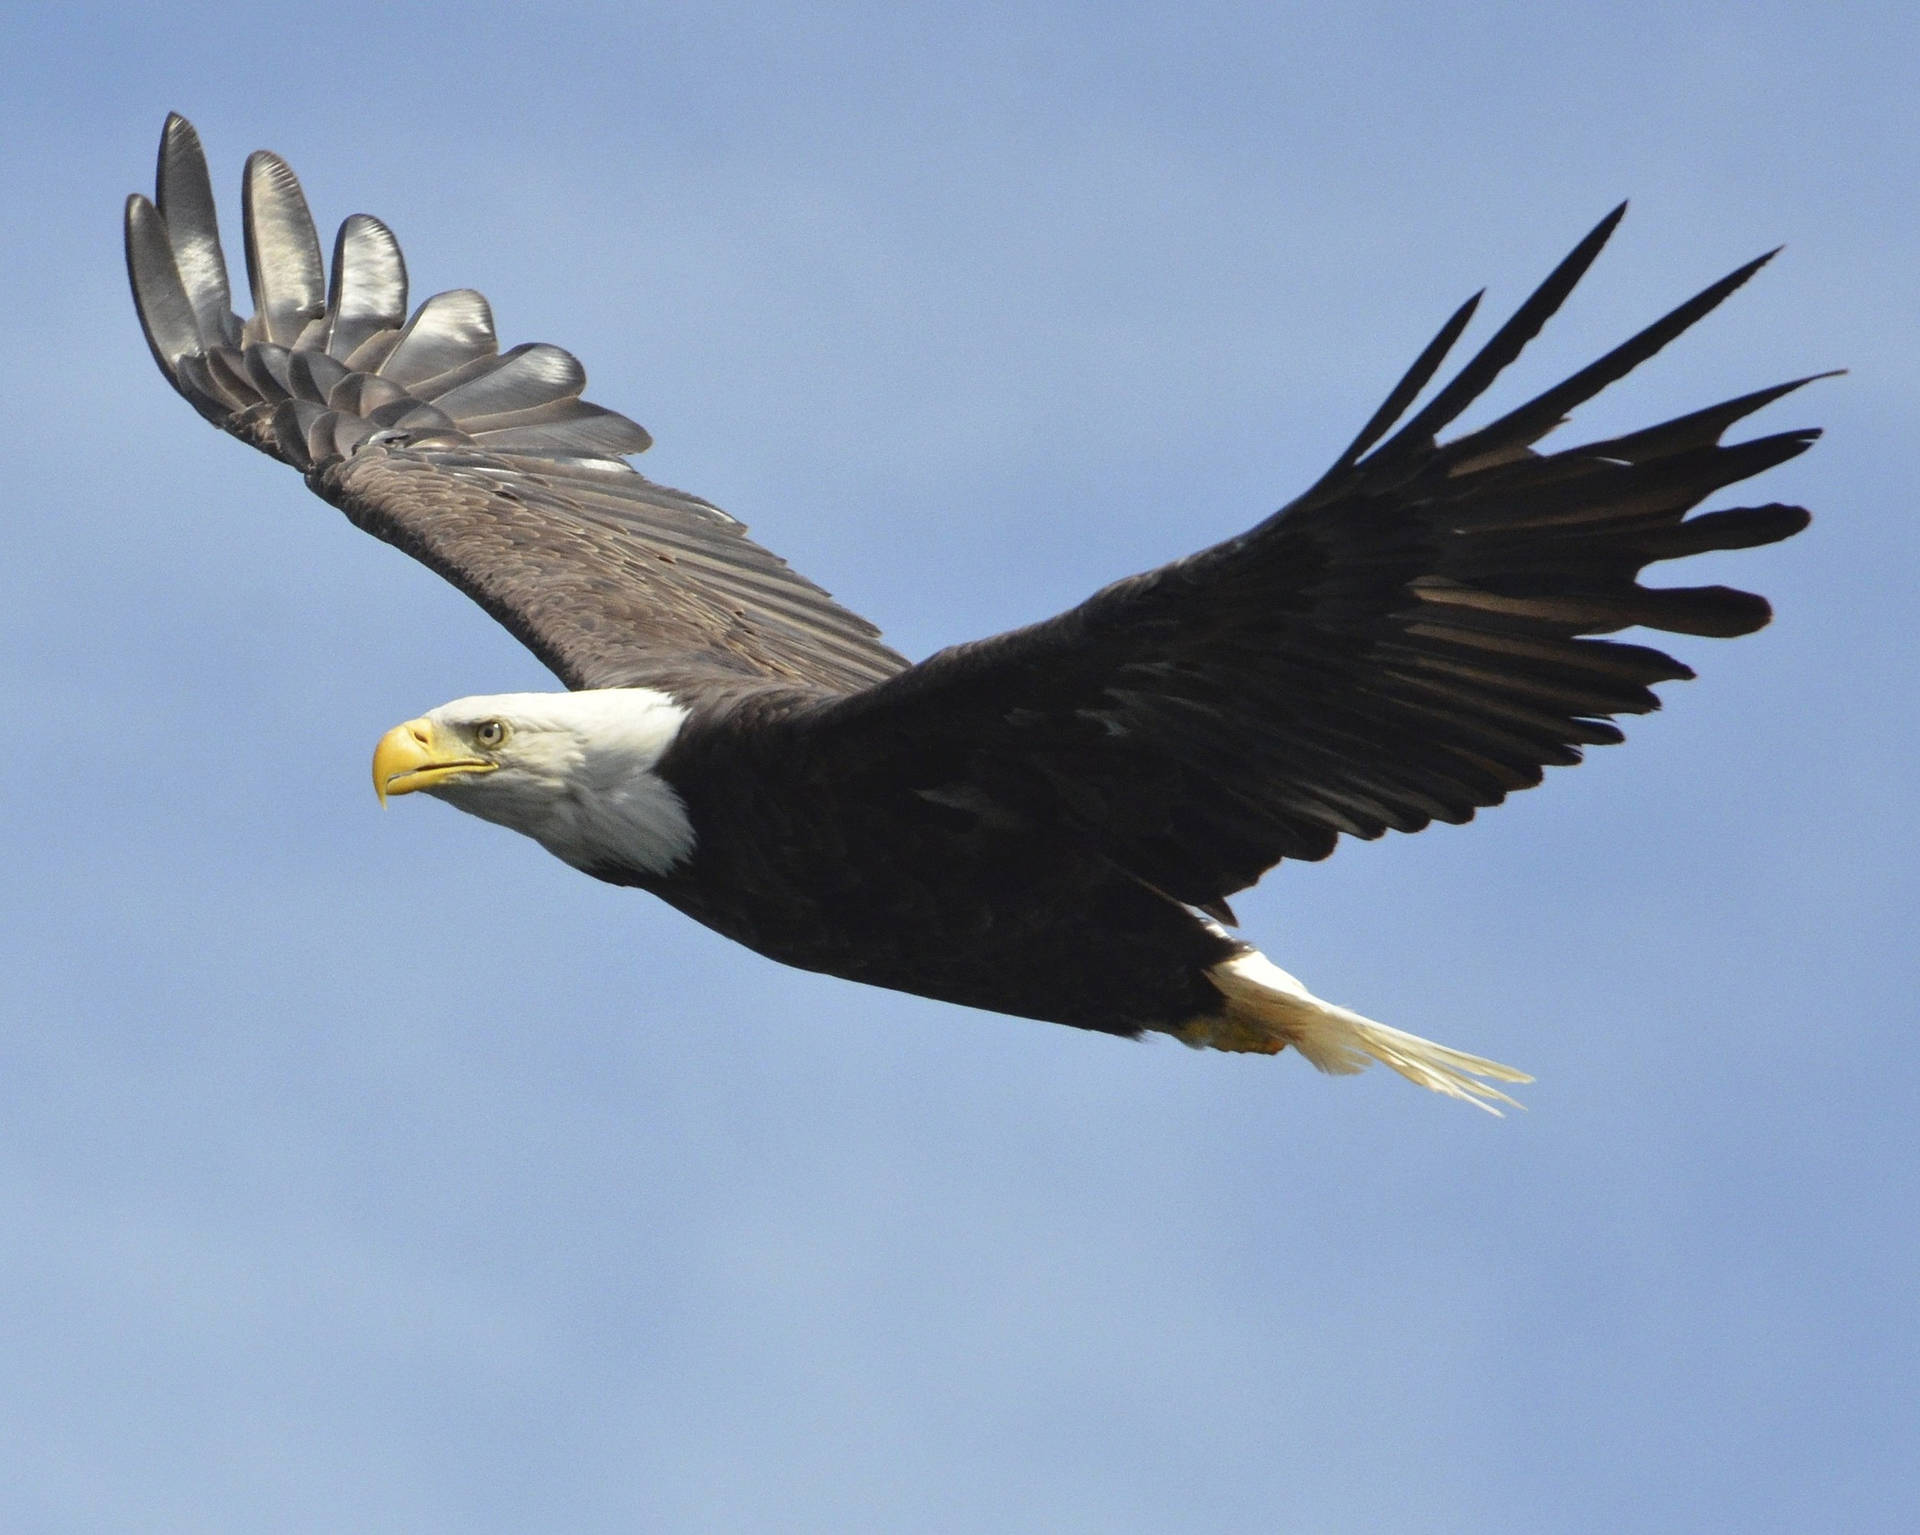 Us Eagle In The Sky